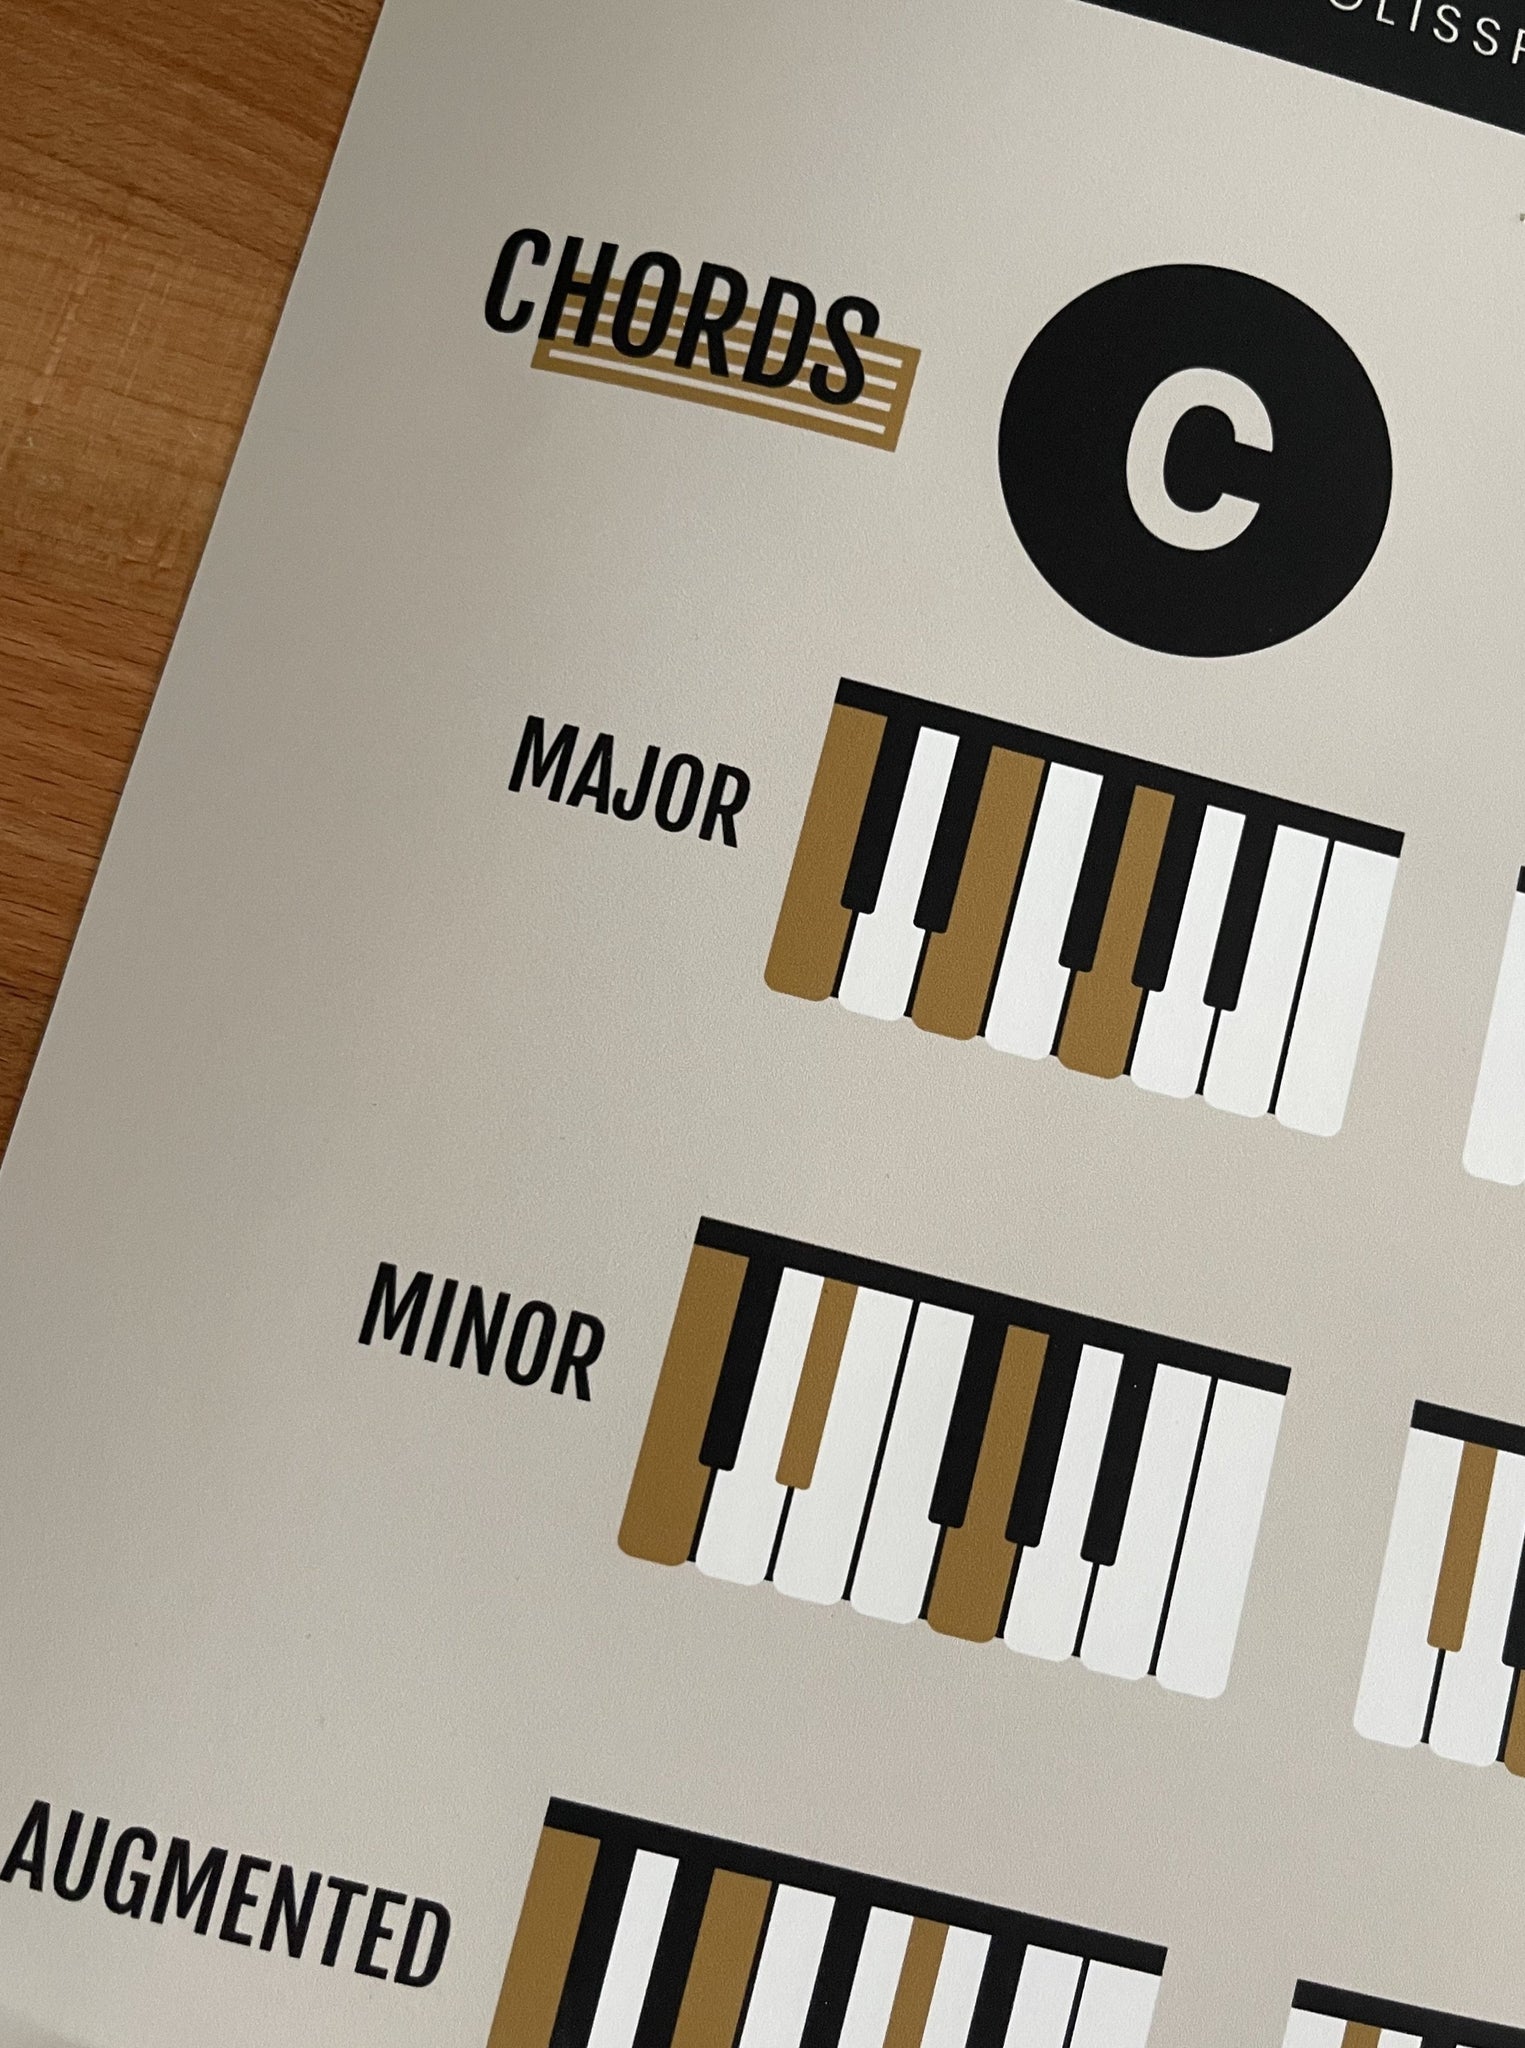 Piano Chords and Scales Master Chart, Cream